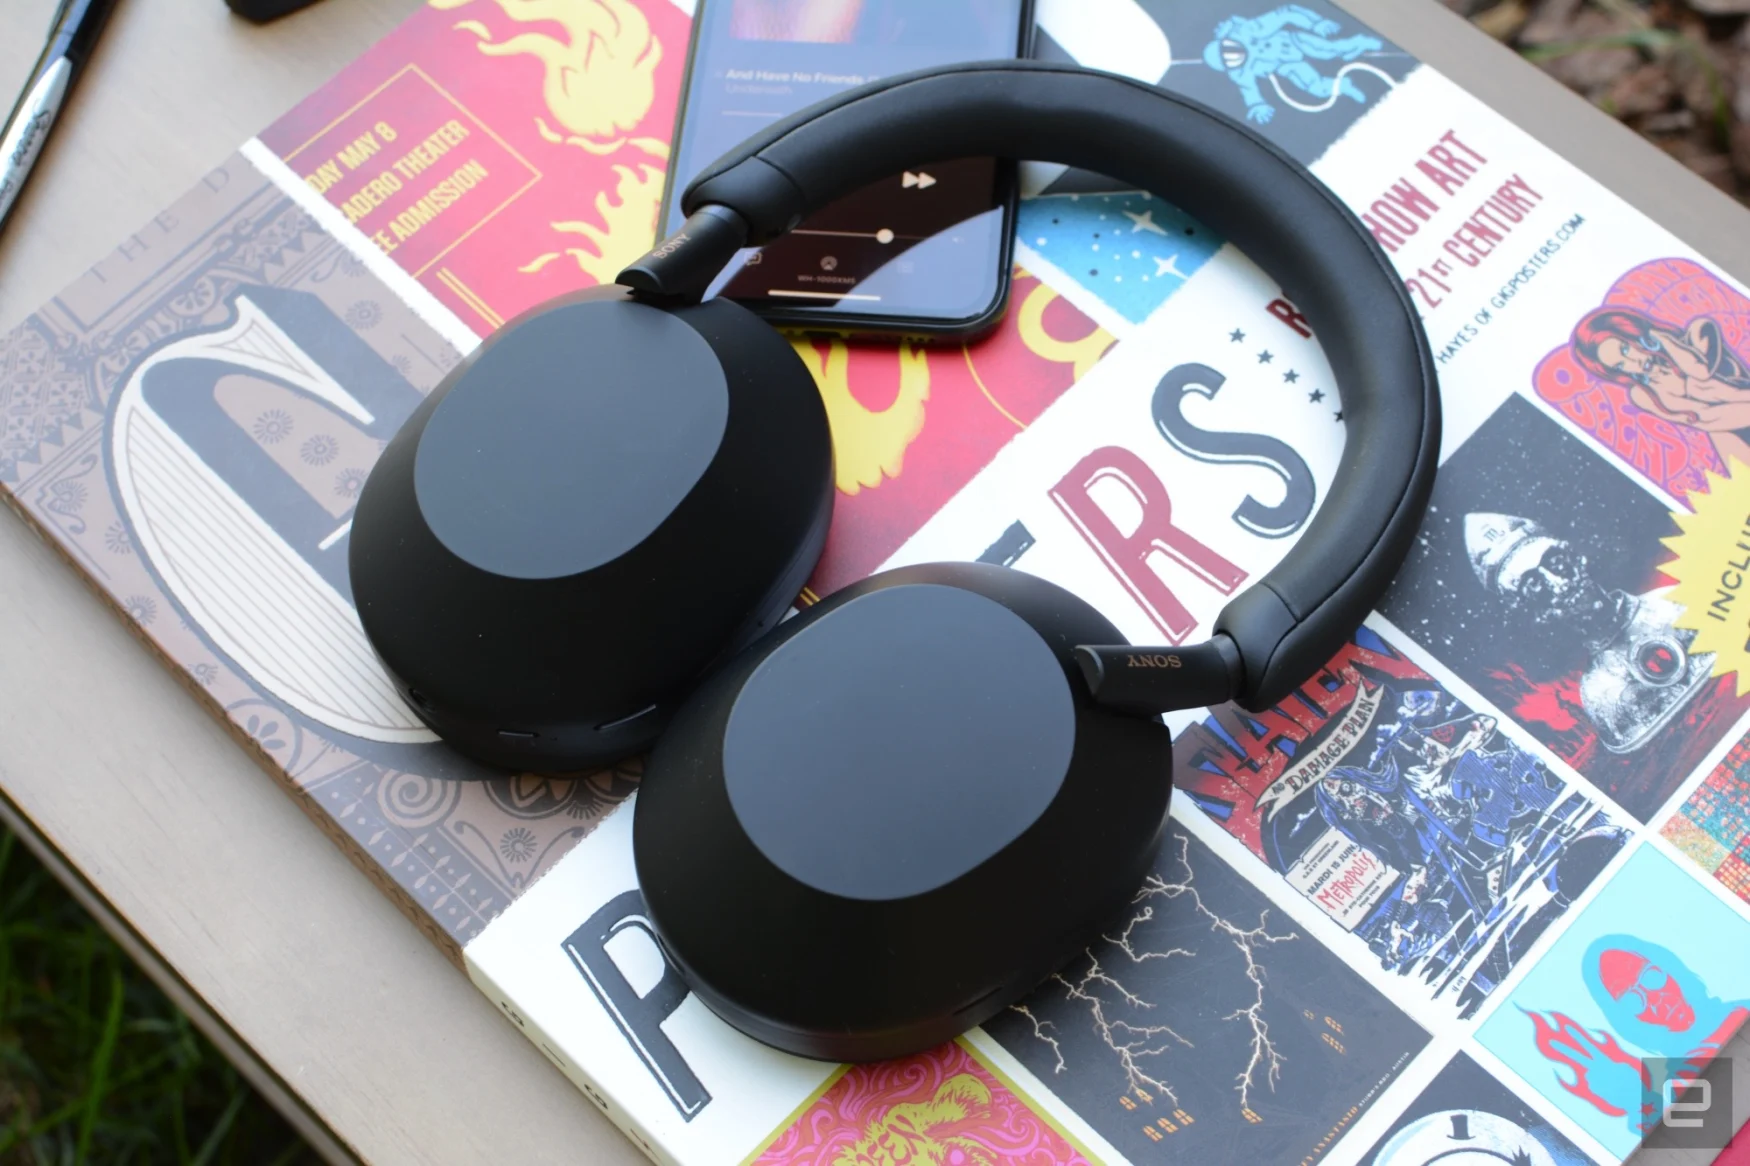 With upgrades to design, sound quality and active noise cancellation, the WH-1000XM5 keeps its place above the competition. These headphones are super comfortable as well, and 30-hour battery life is more than adequate. The M5 makes it clear that Sony won’t be dethroned anytime soon.